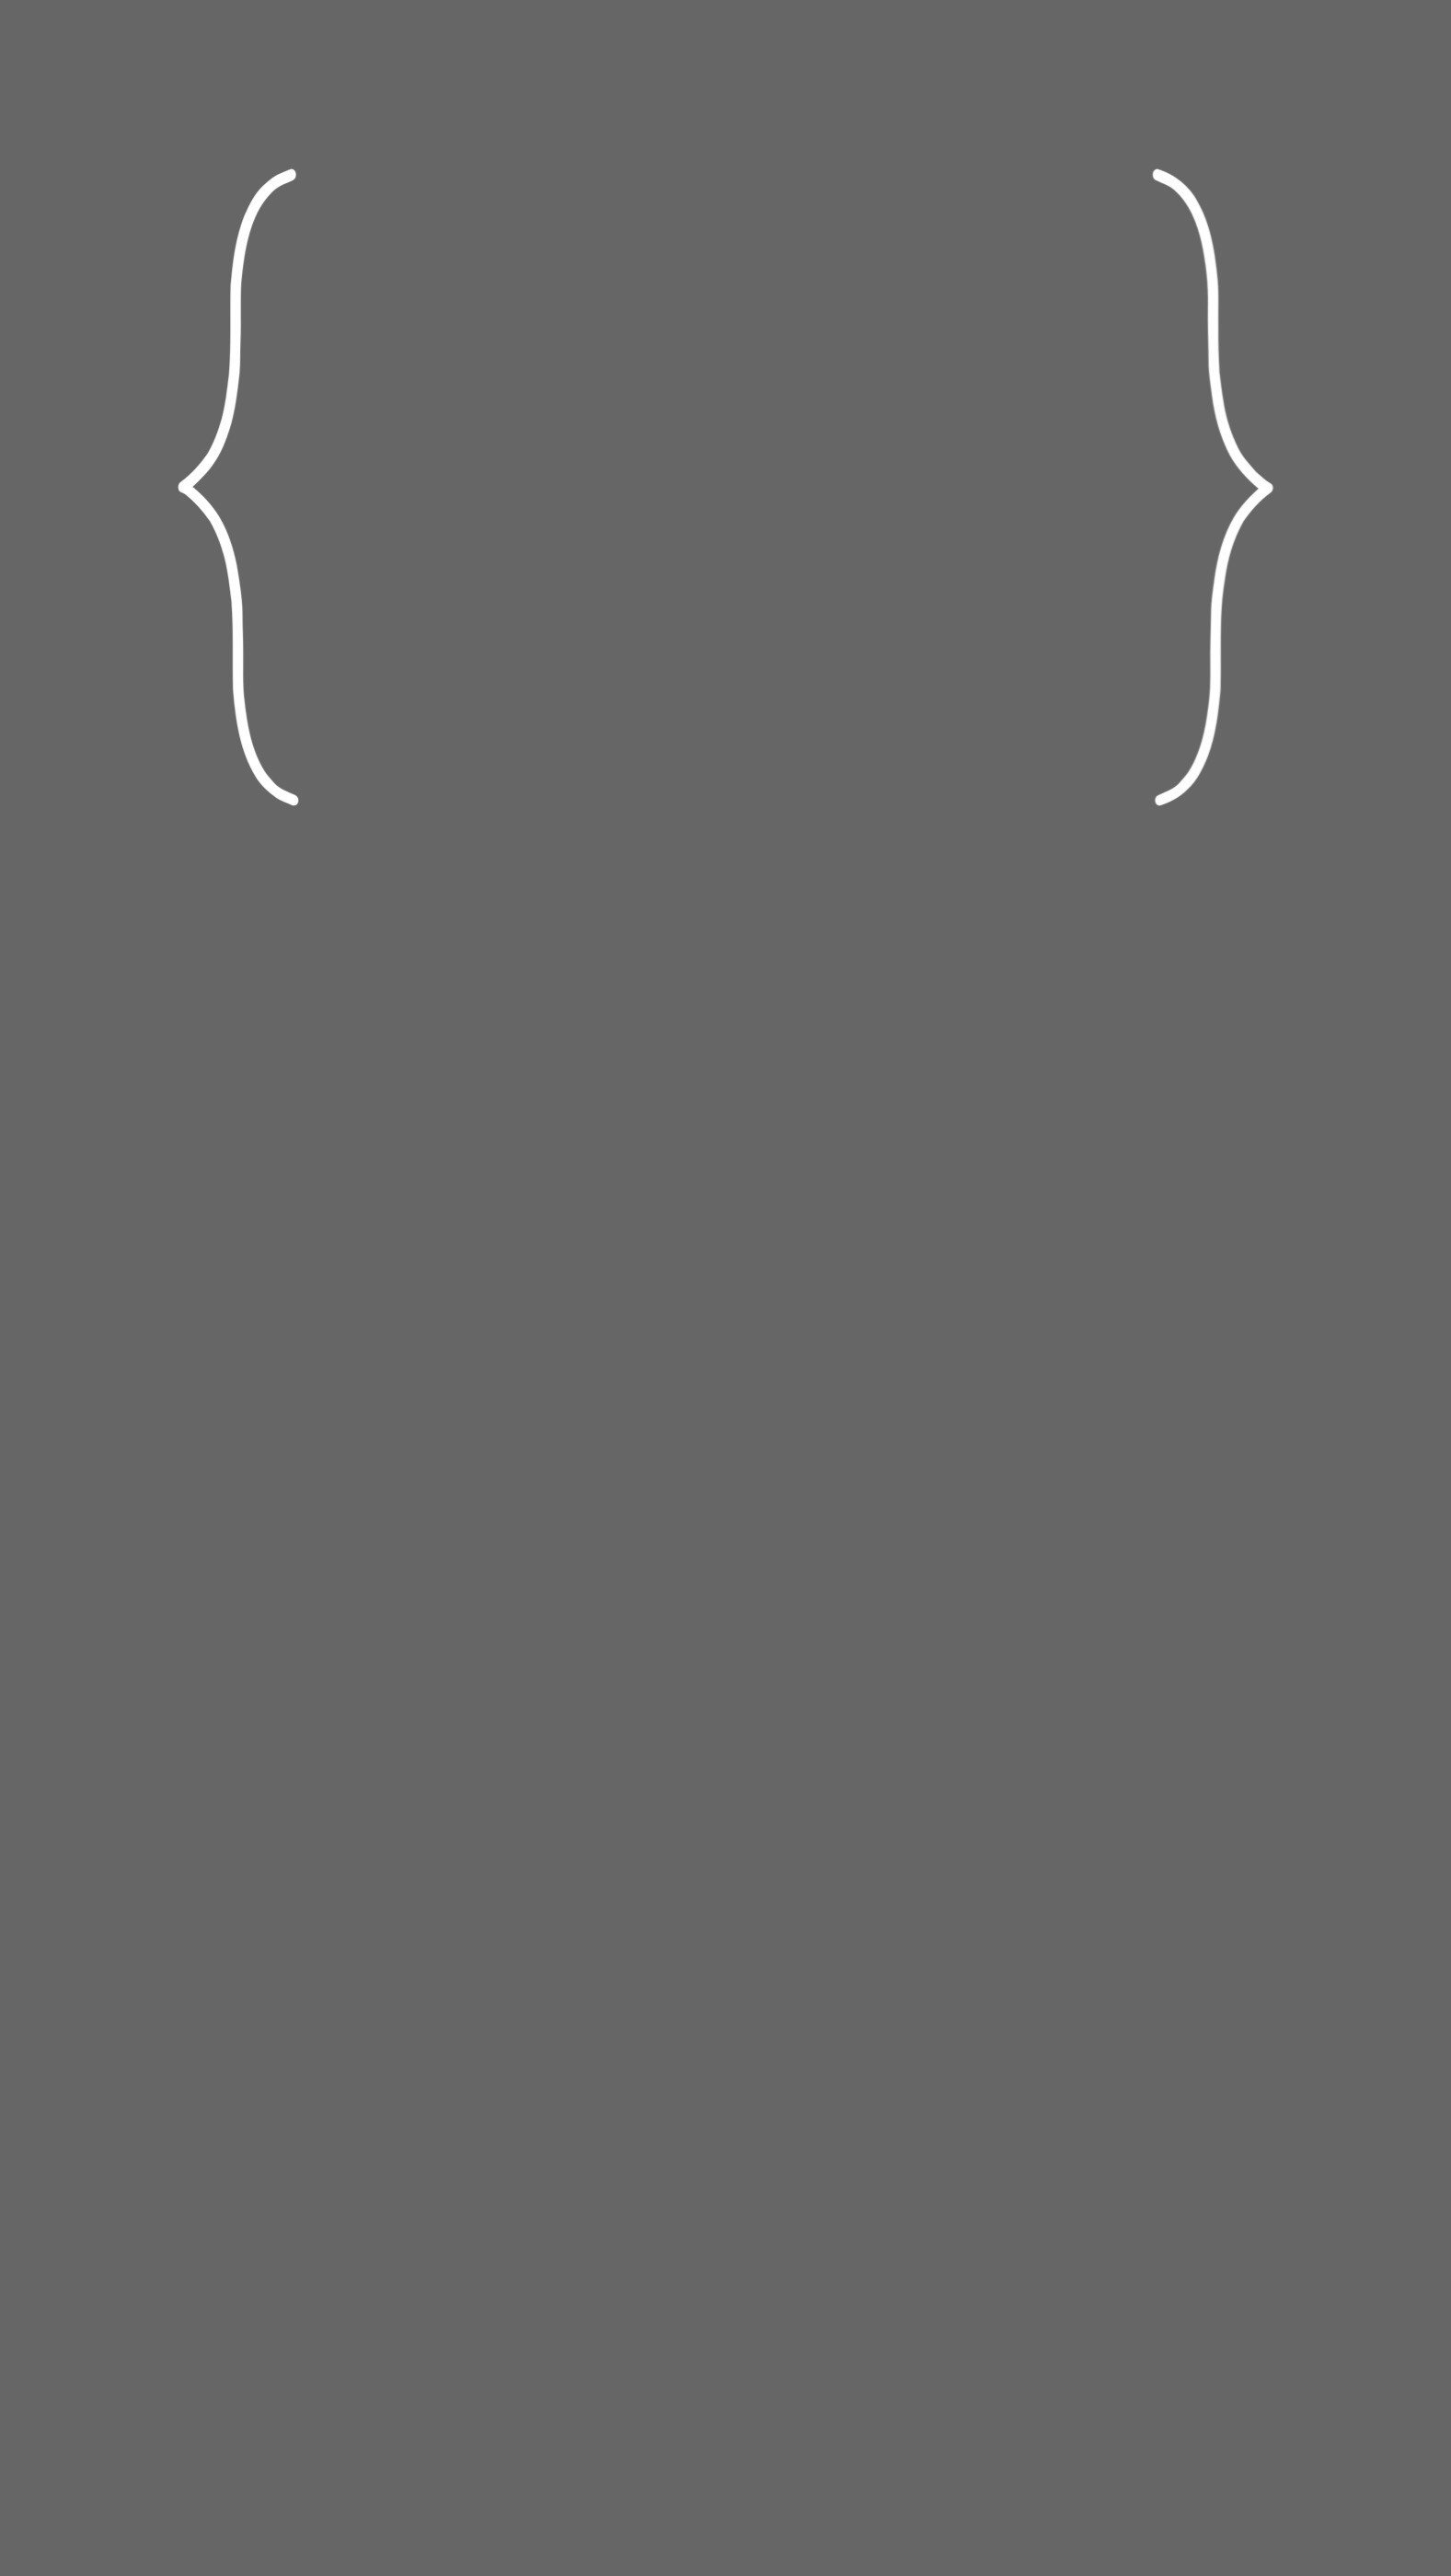 1577x2799 iPhone 6 Plus lock screen wallpaper. Minimal gray with white clock outline.